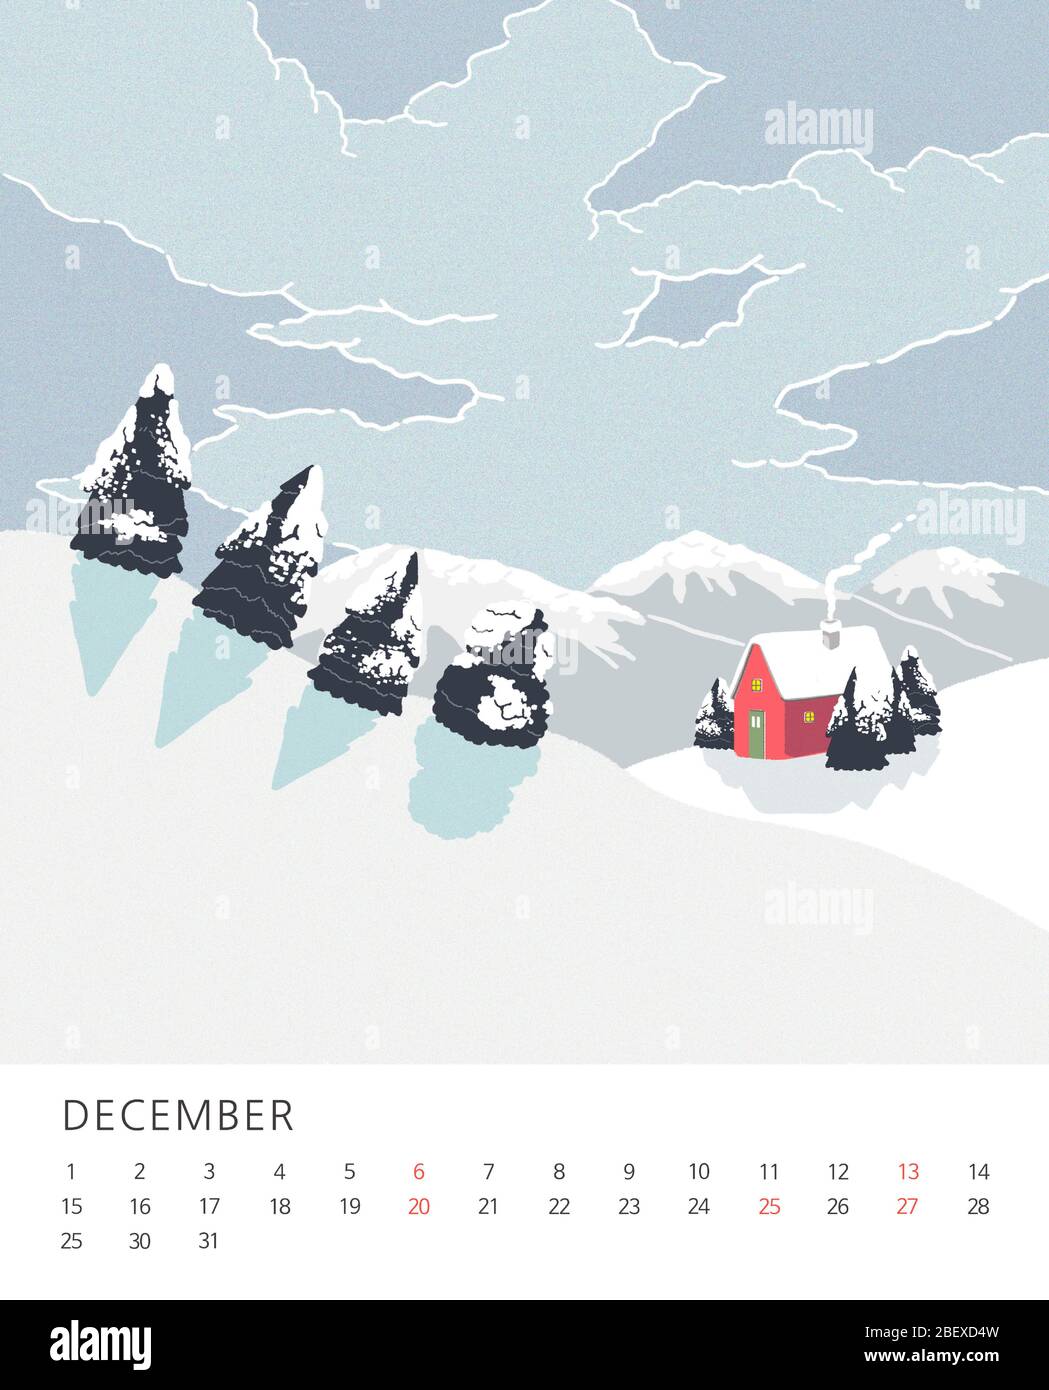 Monthly calendar template with beautiful seasonal scenery illustration ...